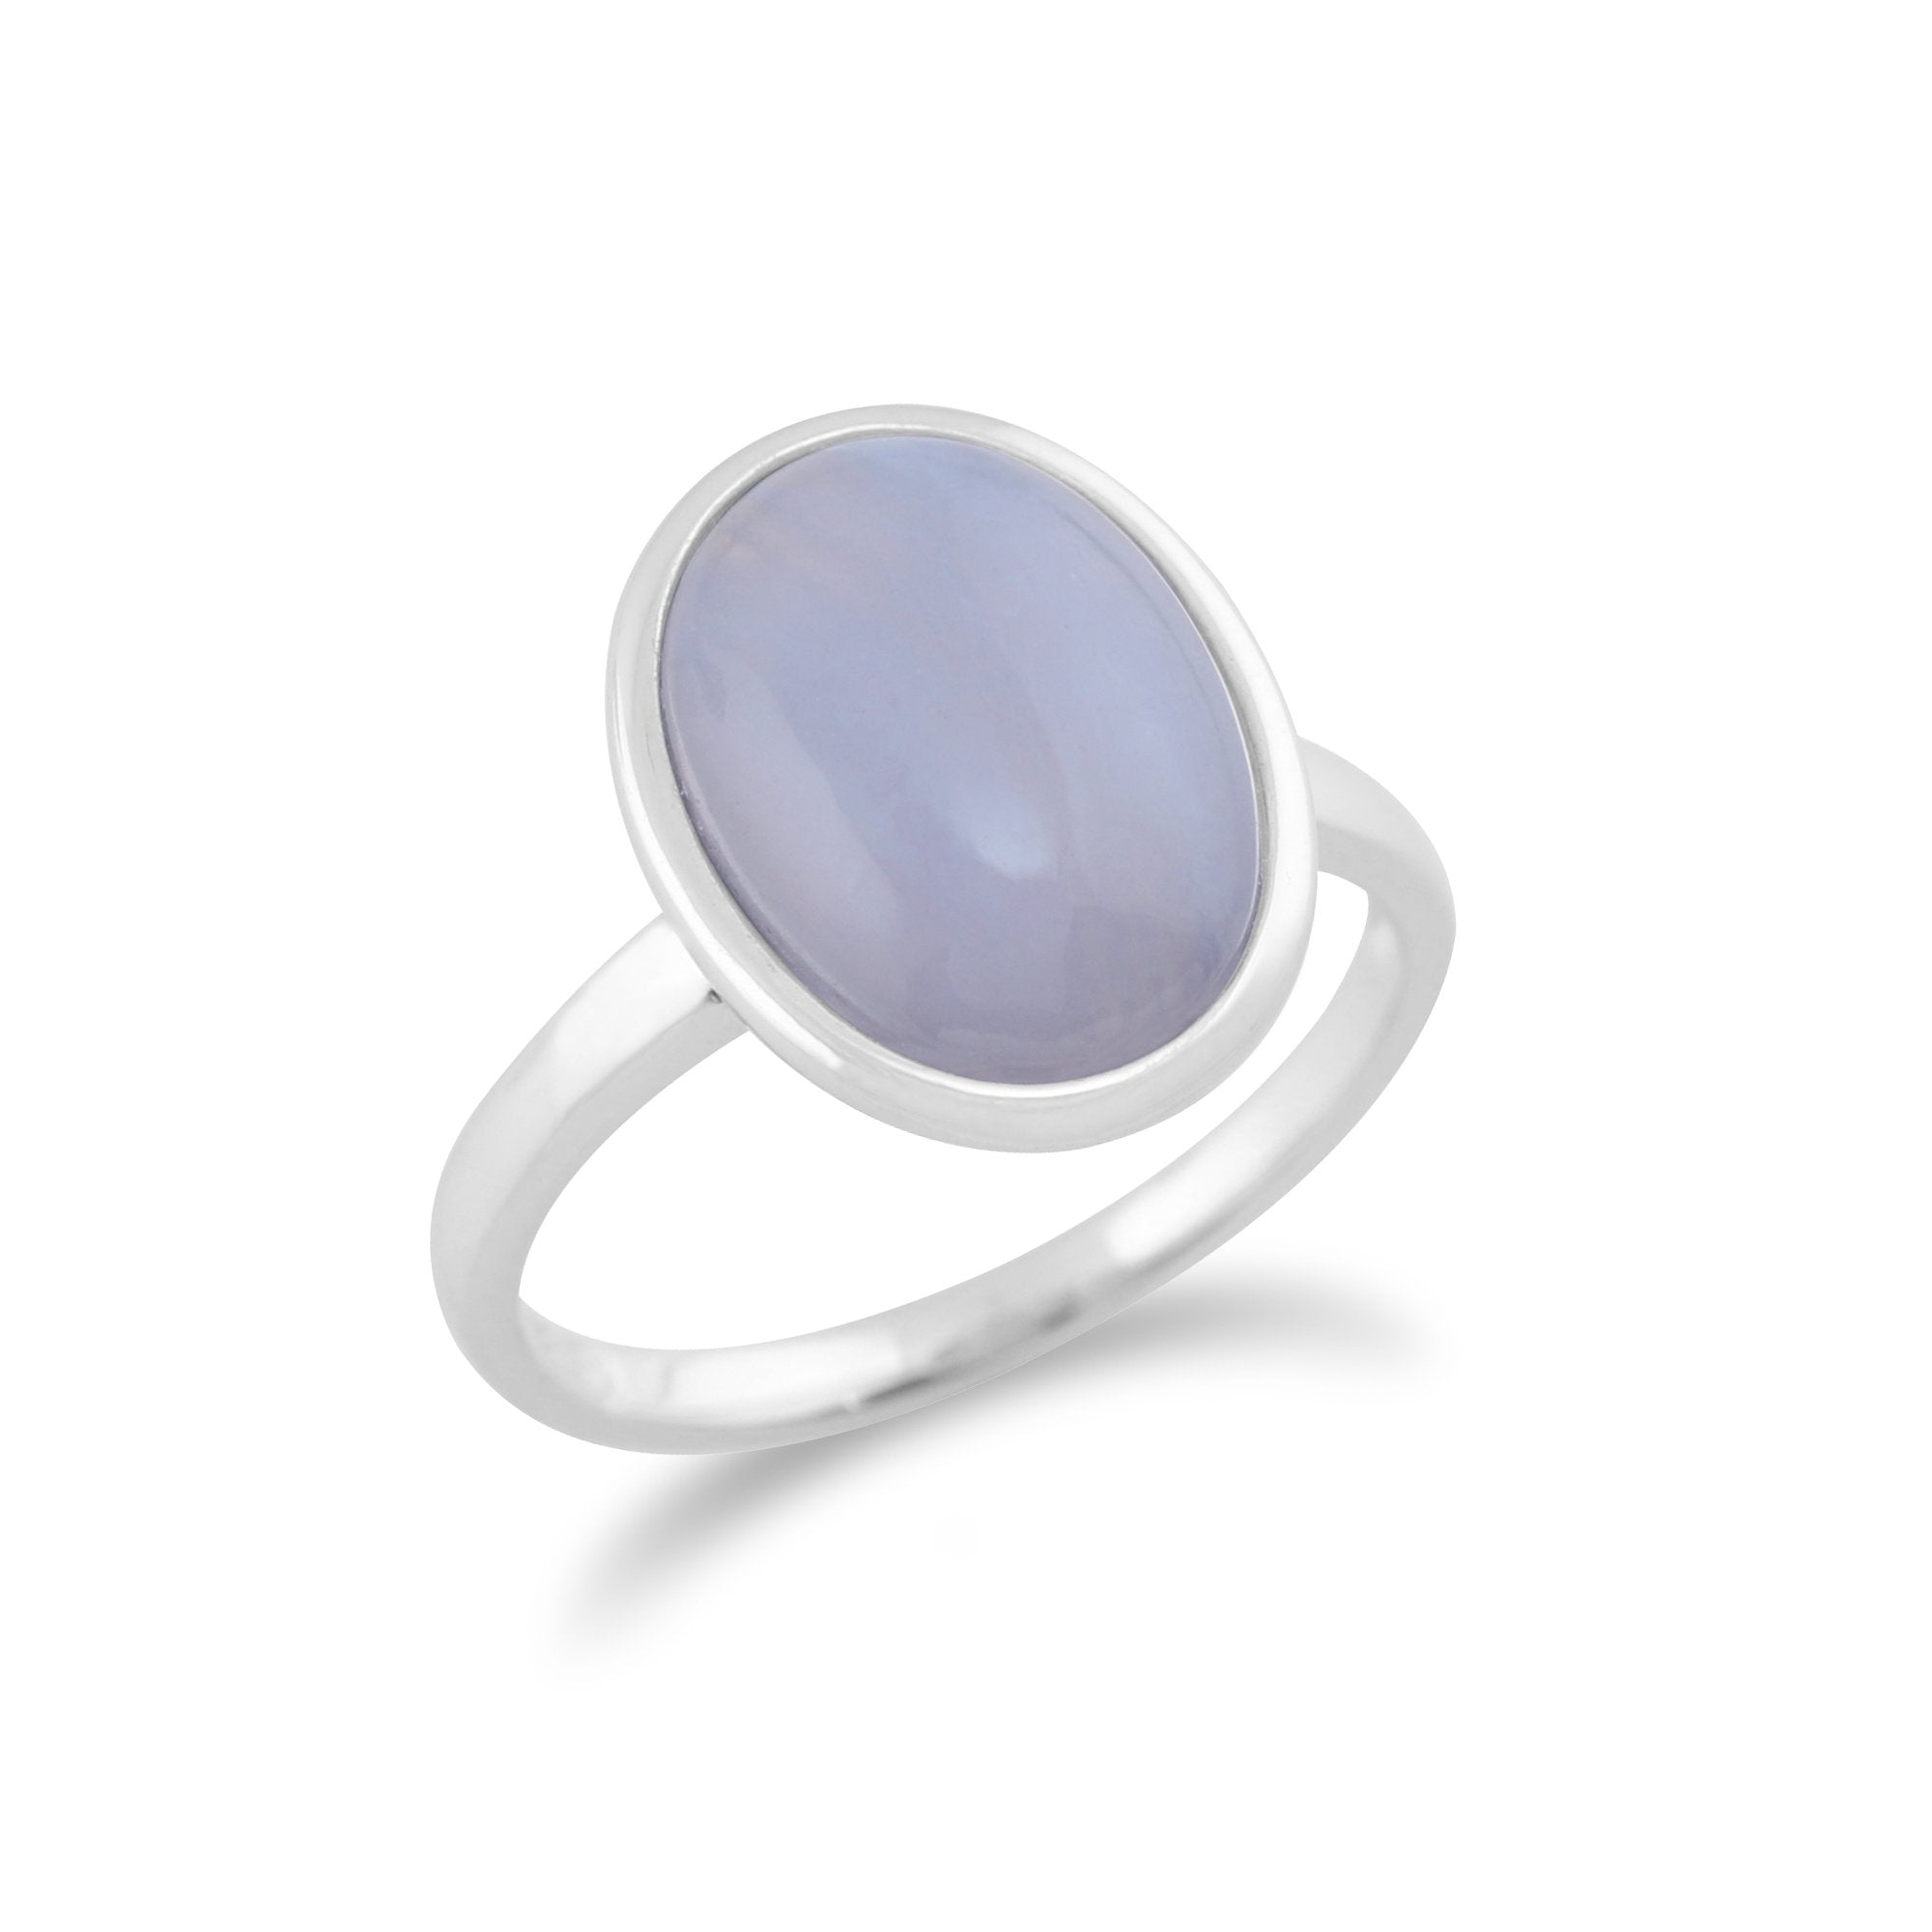 Classic Oval Blue Lace Agate Bezel Set Cocktail Ring in 925 Sterling Silver